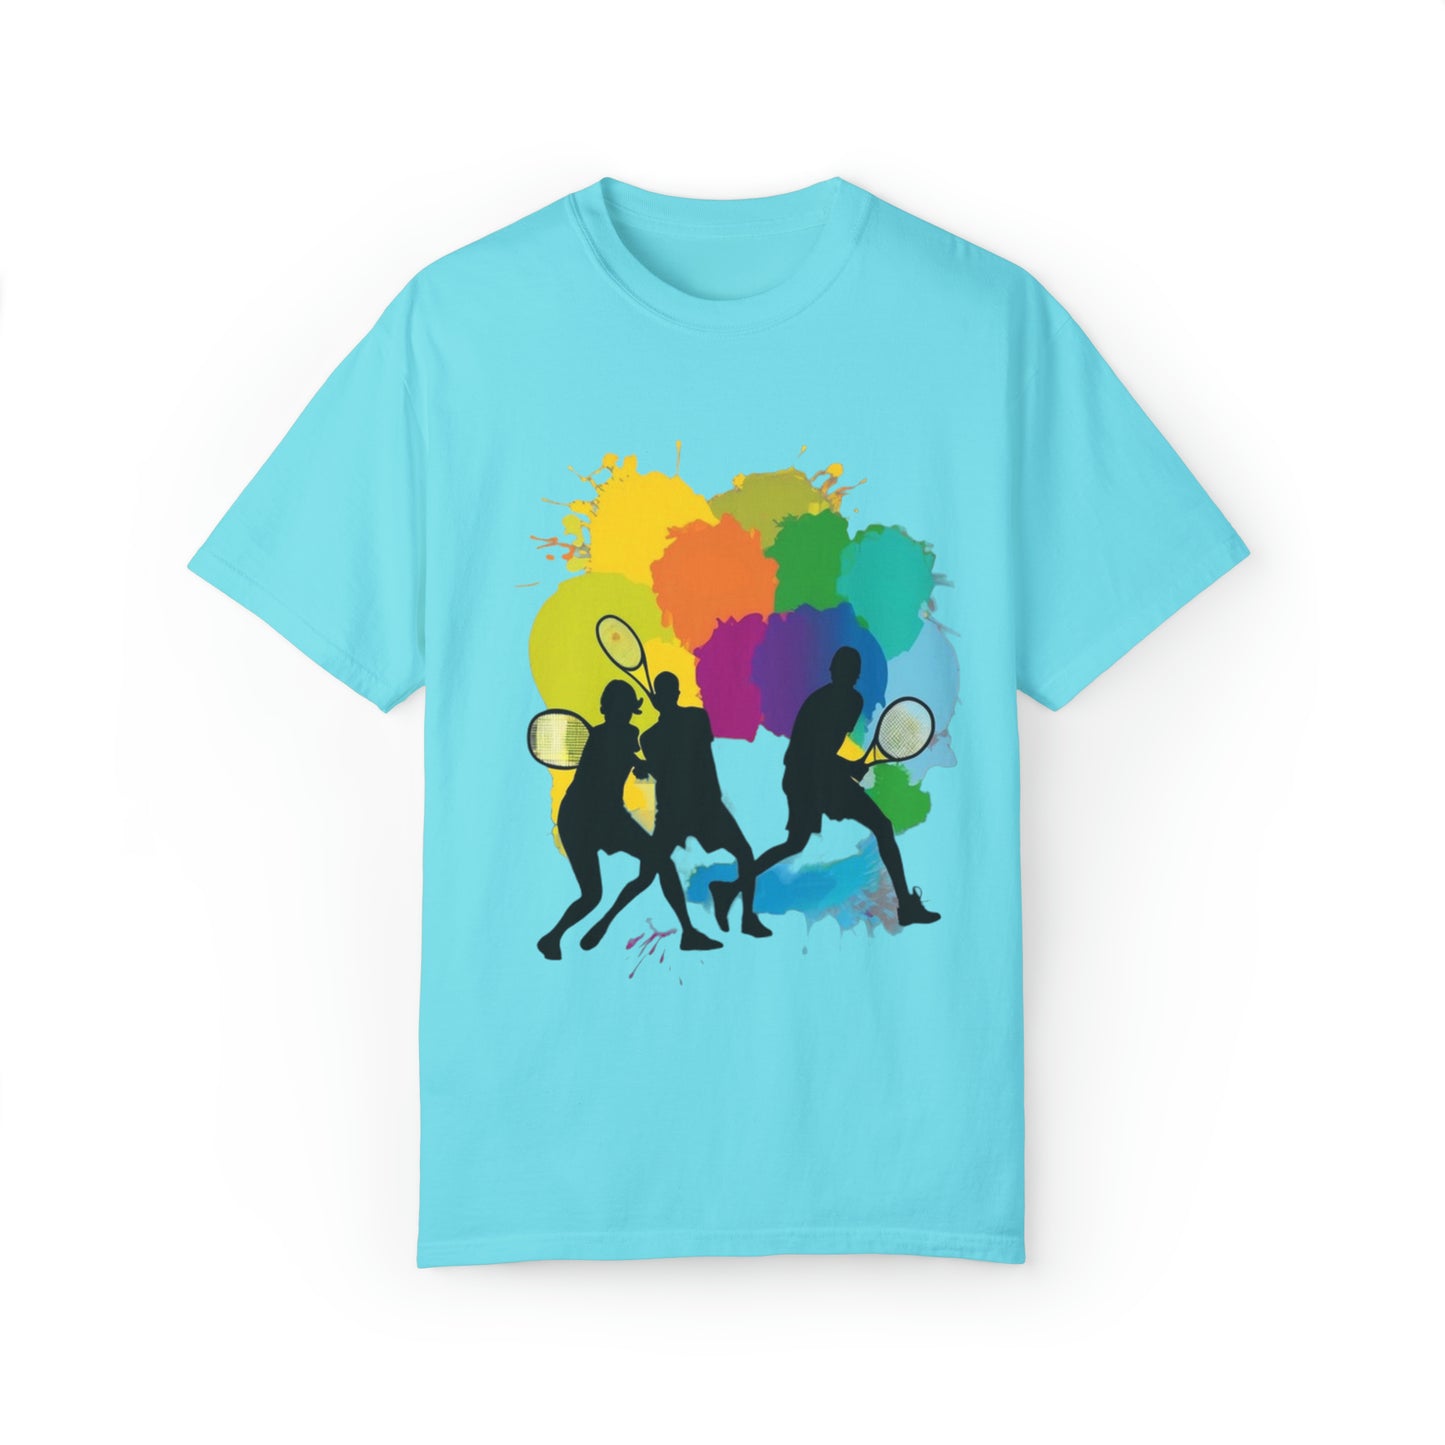 Come play Tennis with us T-Shirt